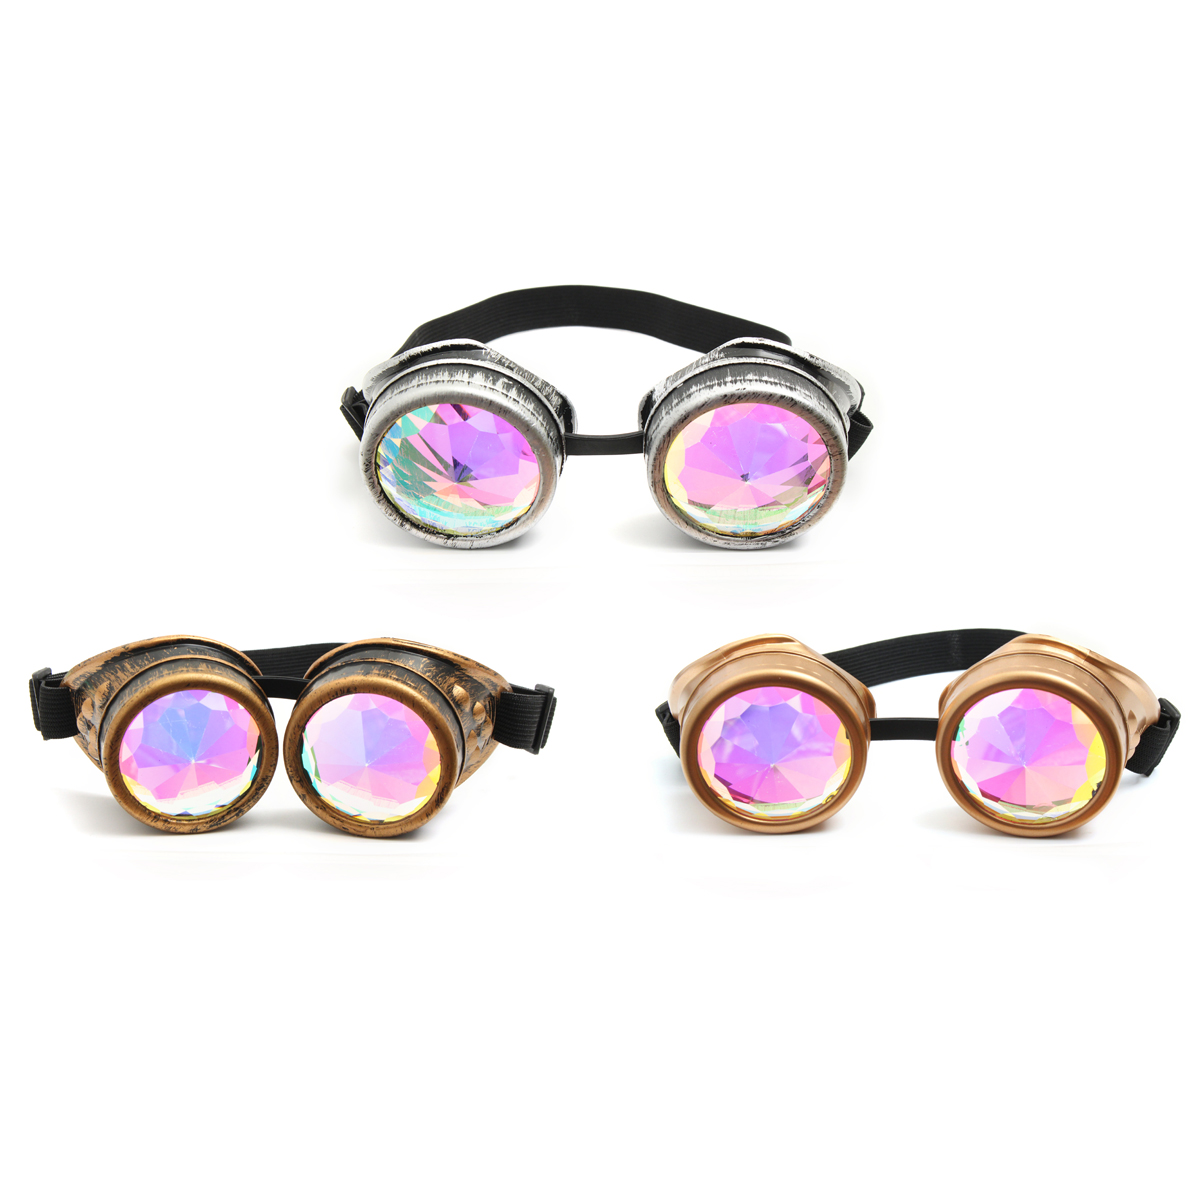 Kaleidoscope-Glasses-Vintage-Style-Windproof-Outdoor-Sunglasses-Gold-Siver-Copper-1209770